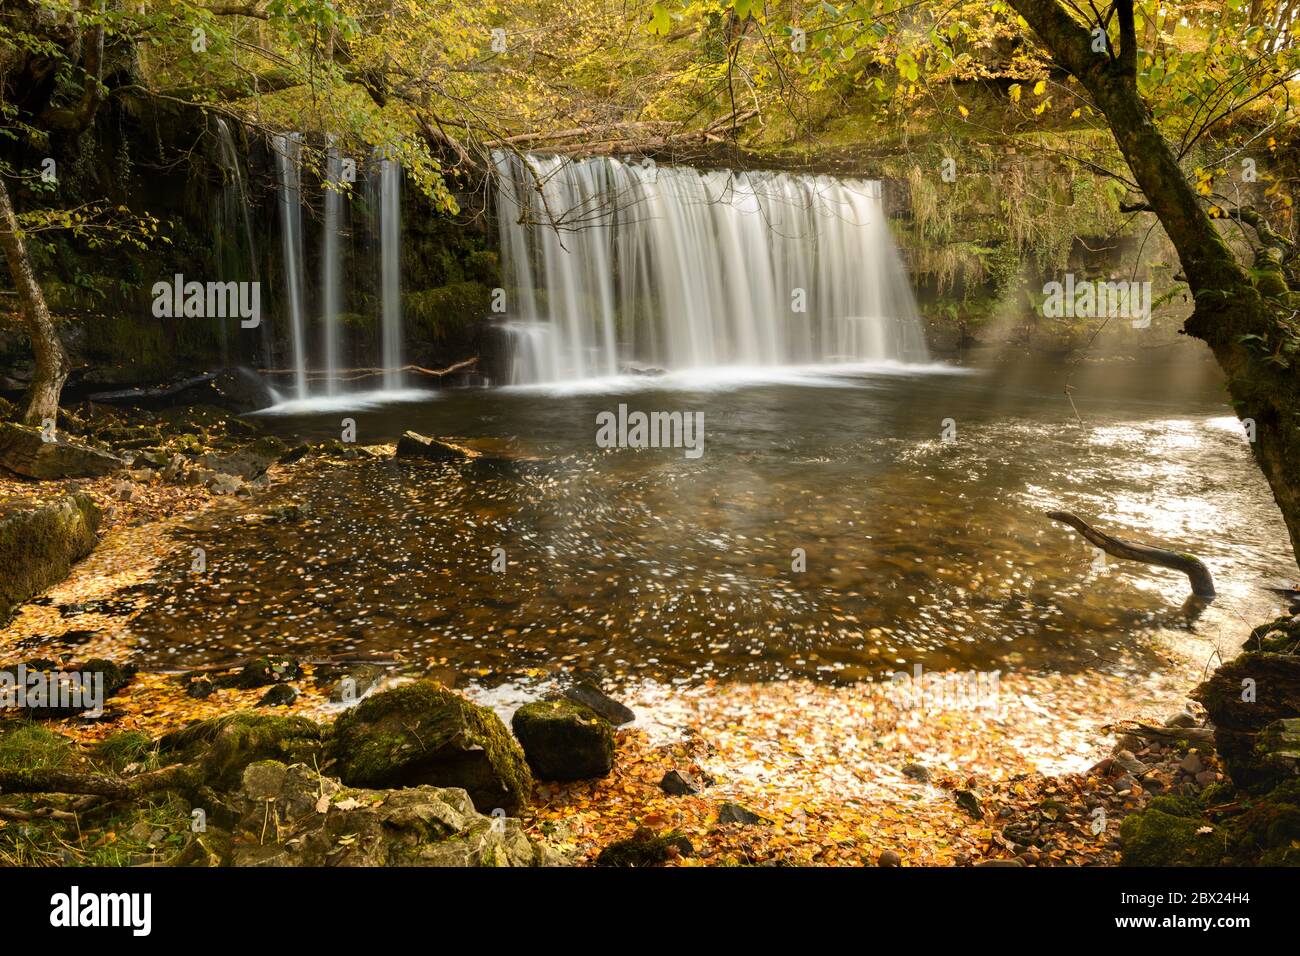 The Sgwd Ddwli waterfall in the Ystradfellte valley, Brecon Beacons Stock Photo